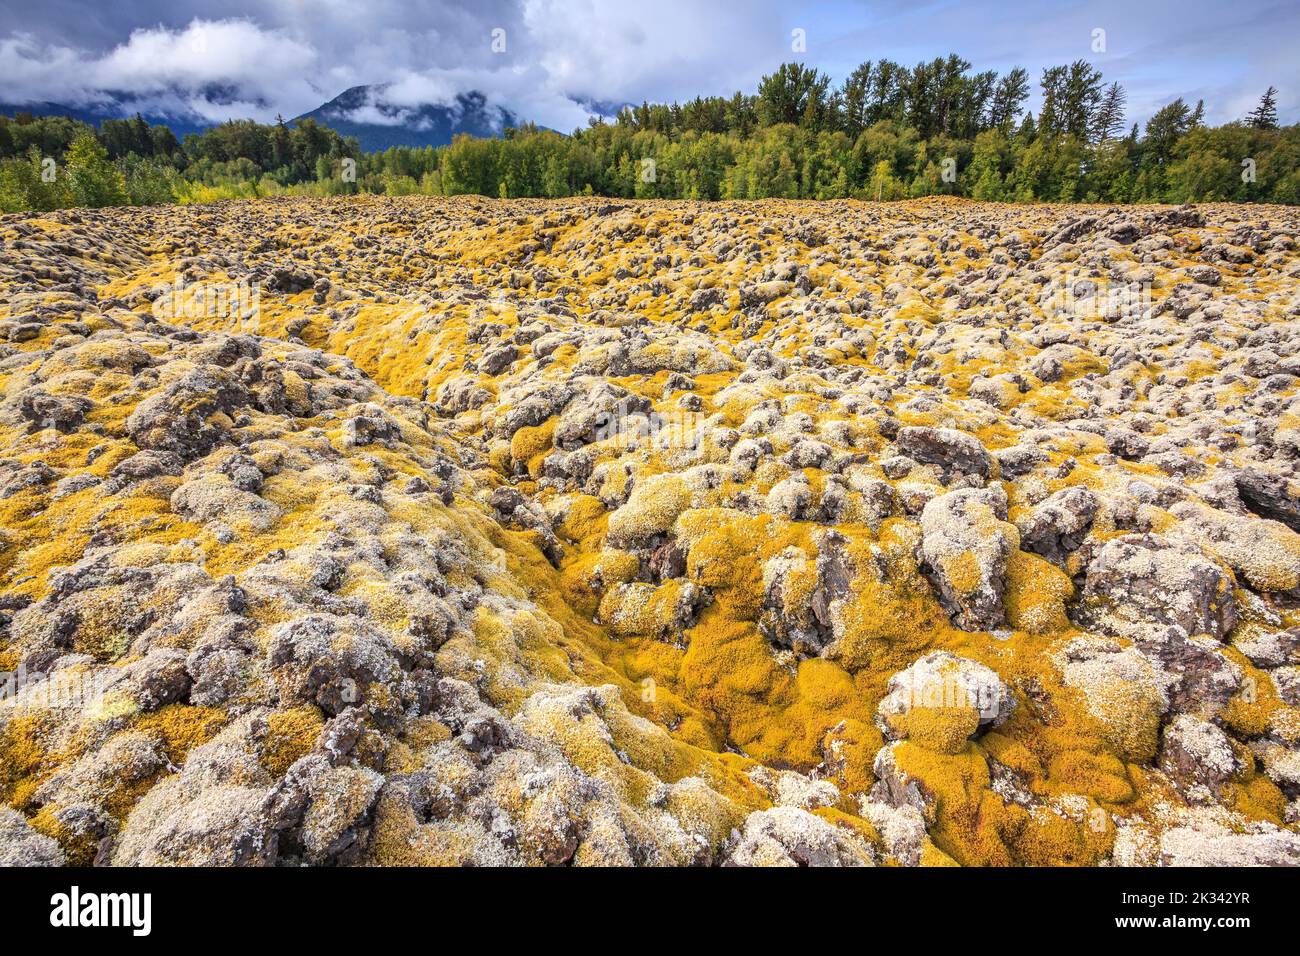 A field of moss-covered lava rocks in the Nisga'a Memorial Lava Beds Provincial Park in British Columbia Stock Photo